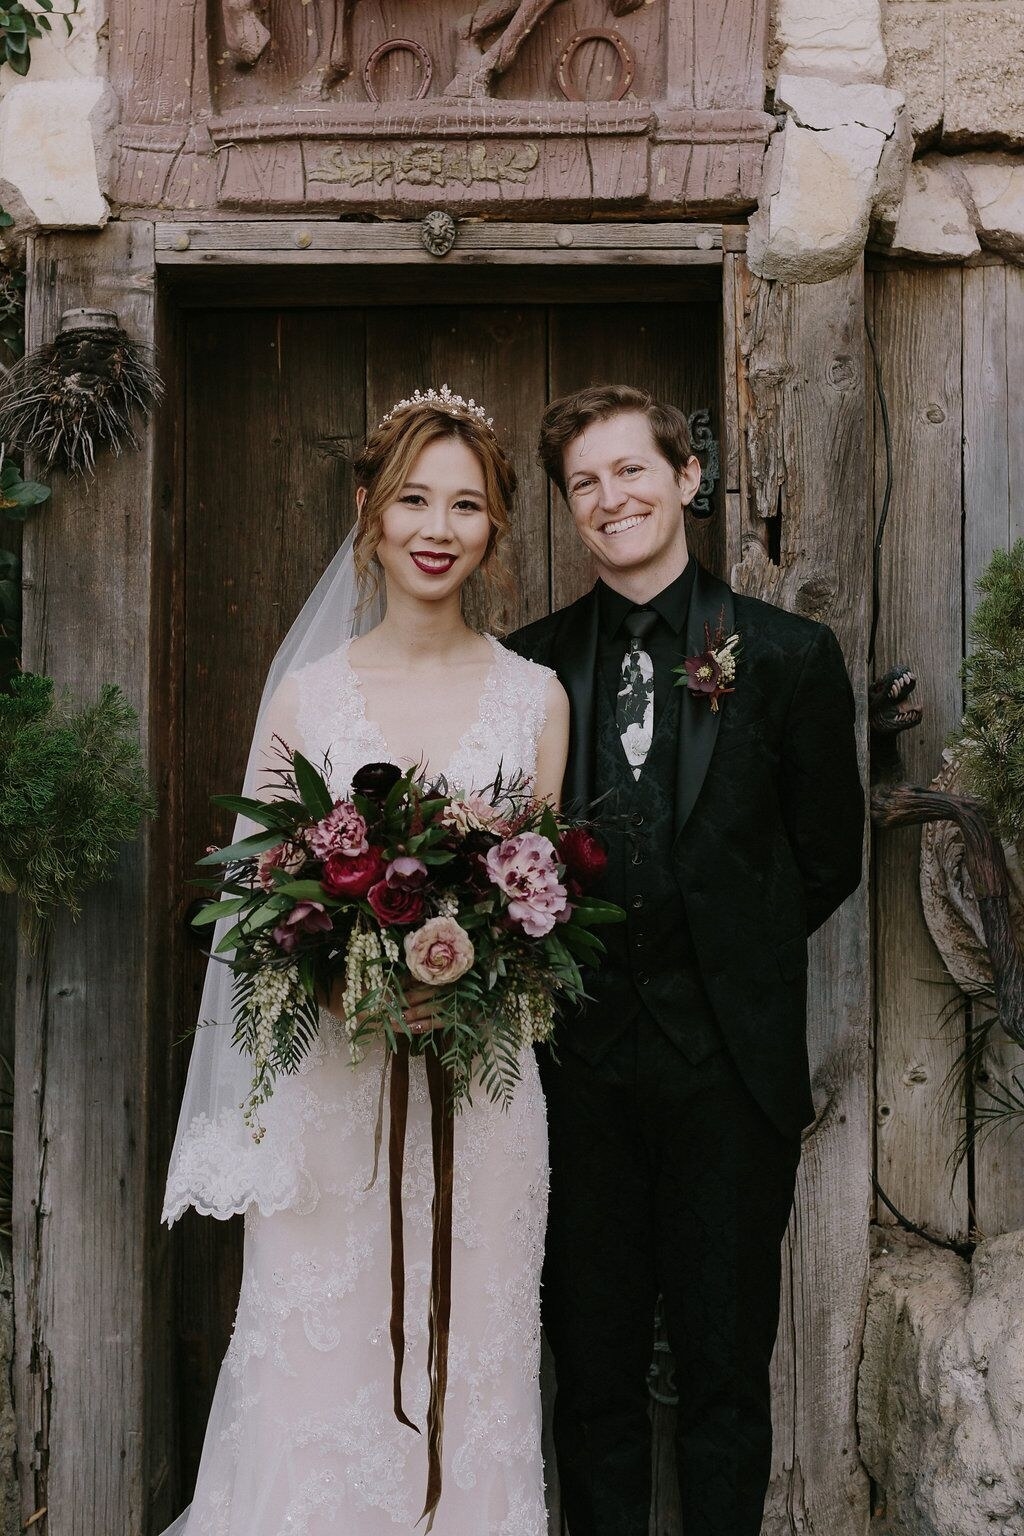 So stunning, in fact, that Martha Stewart Weddings did a feature on their big day.